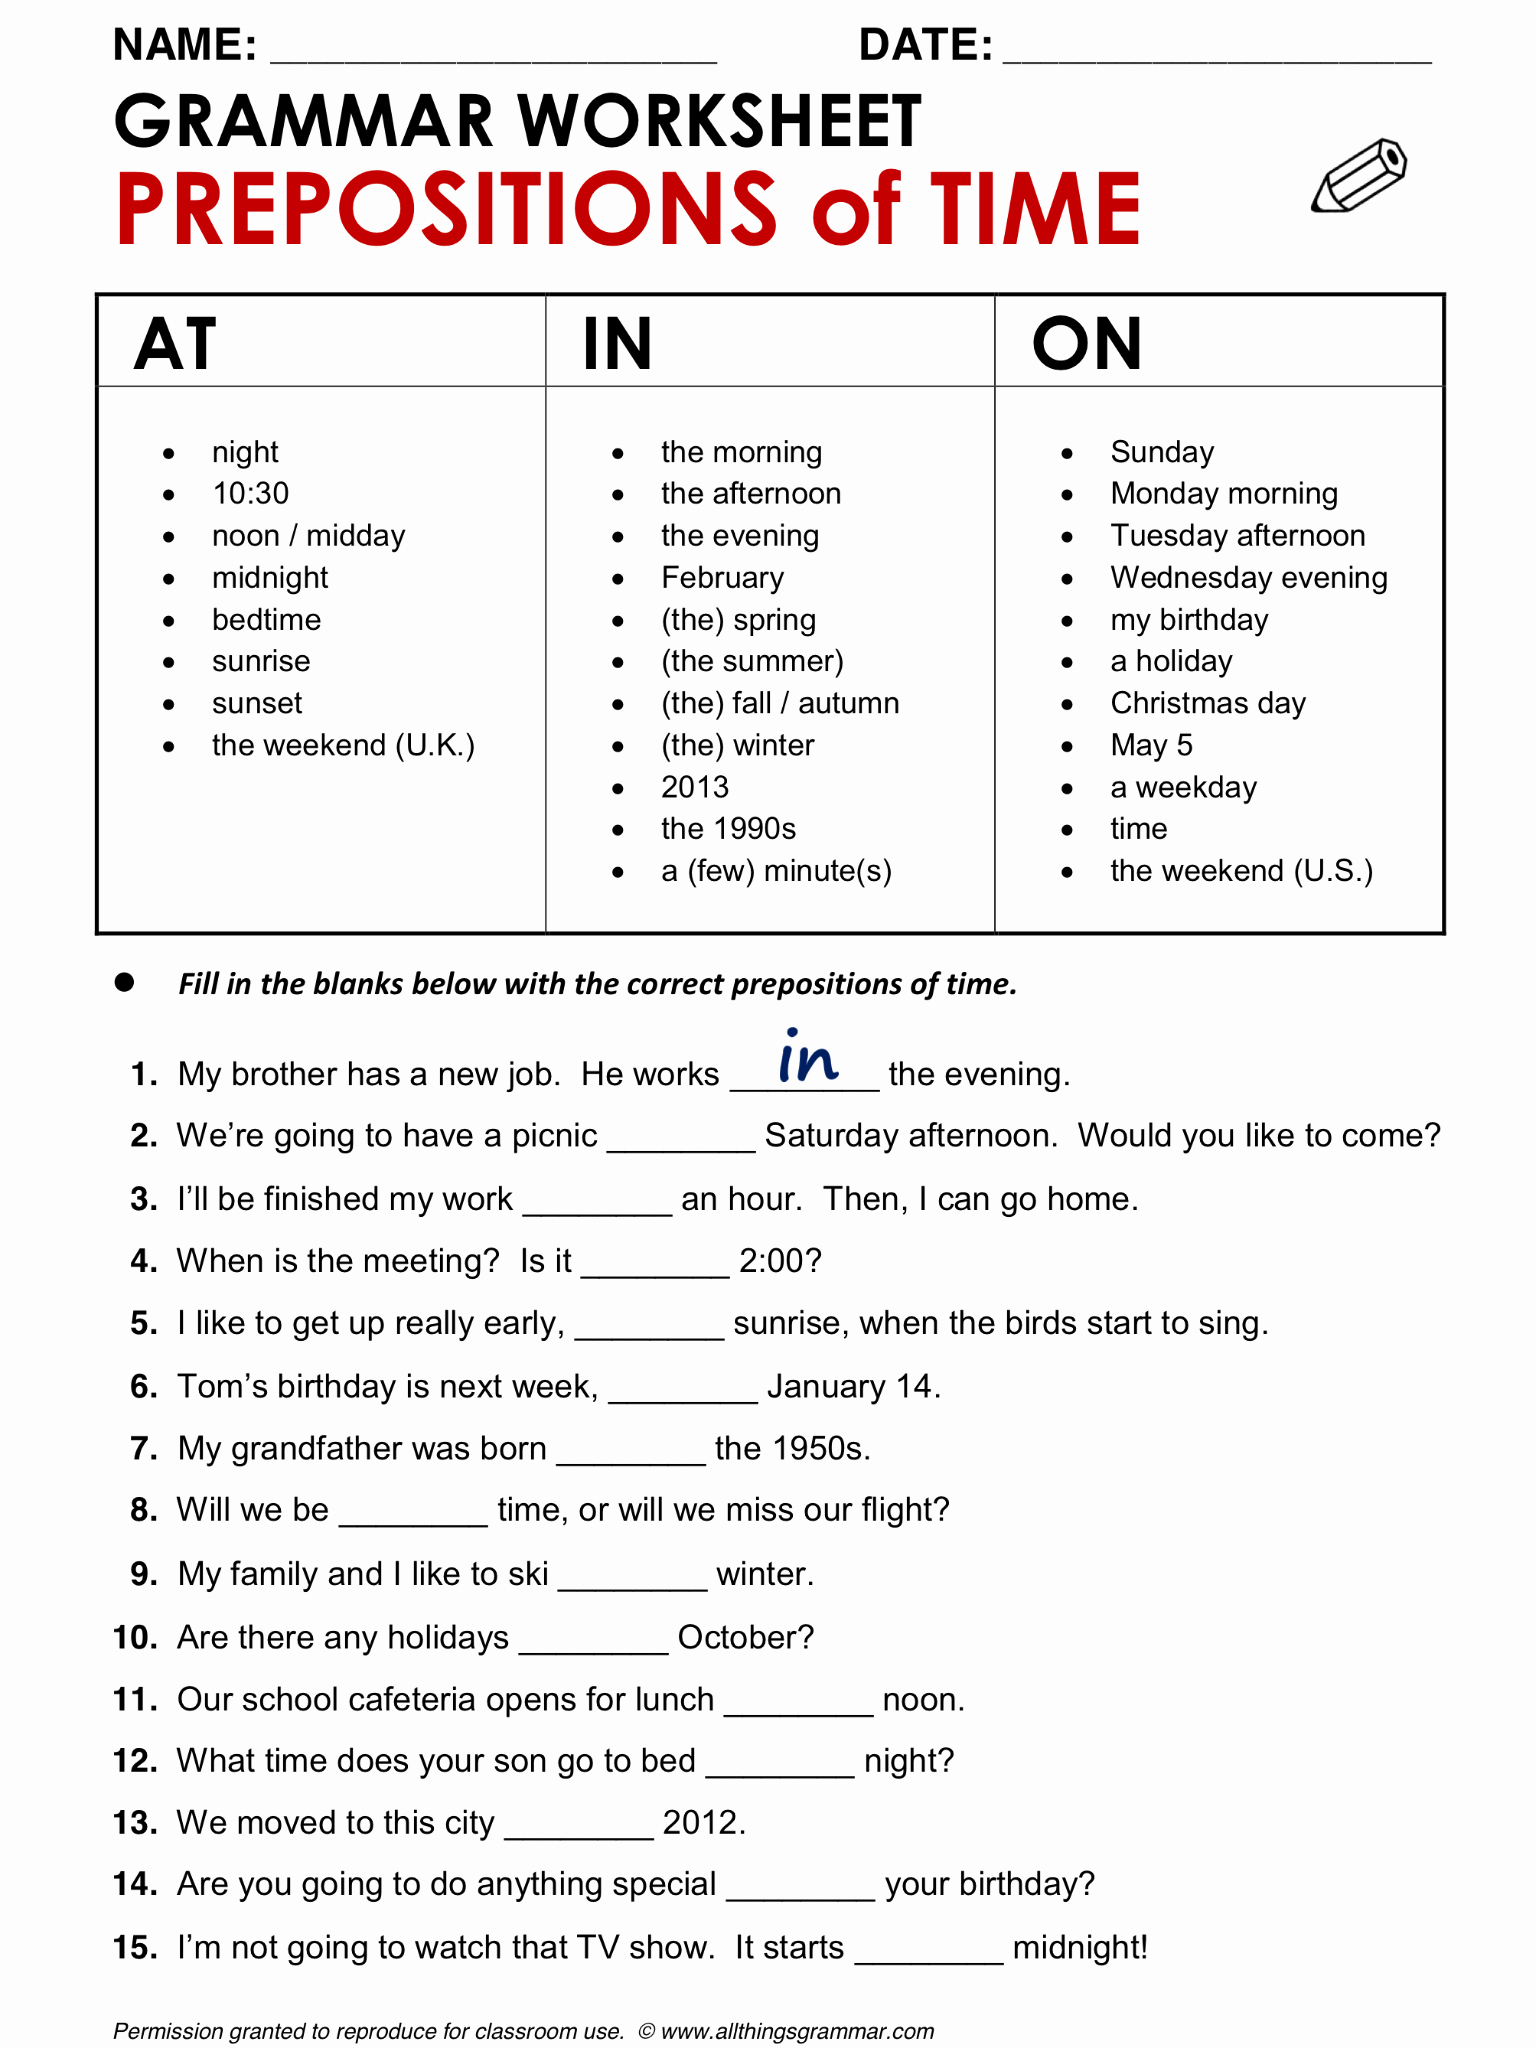 Verbs Worksheets for Middle School Awesome Gramar Worksheet Middle School